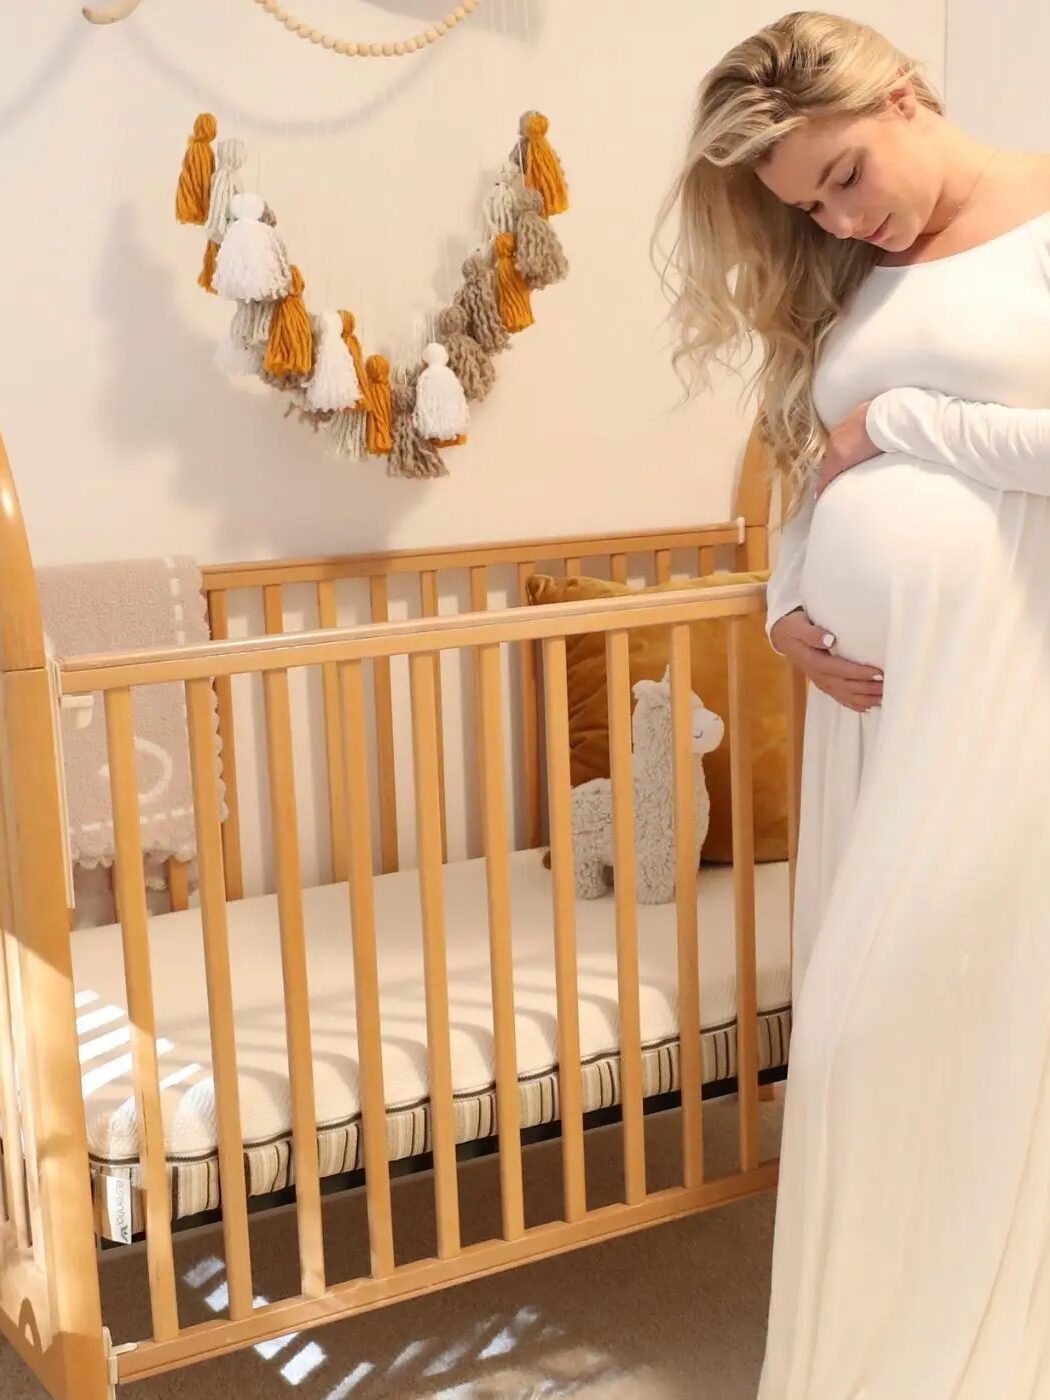 A pregnant woman cradles her belly next to a crib